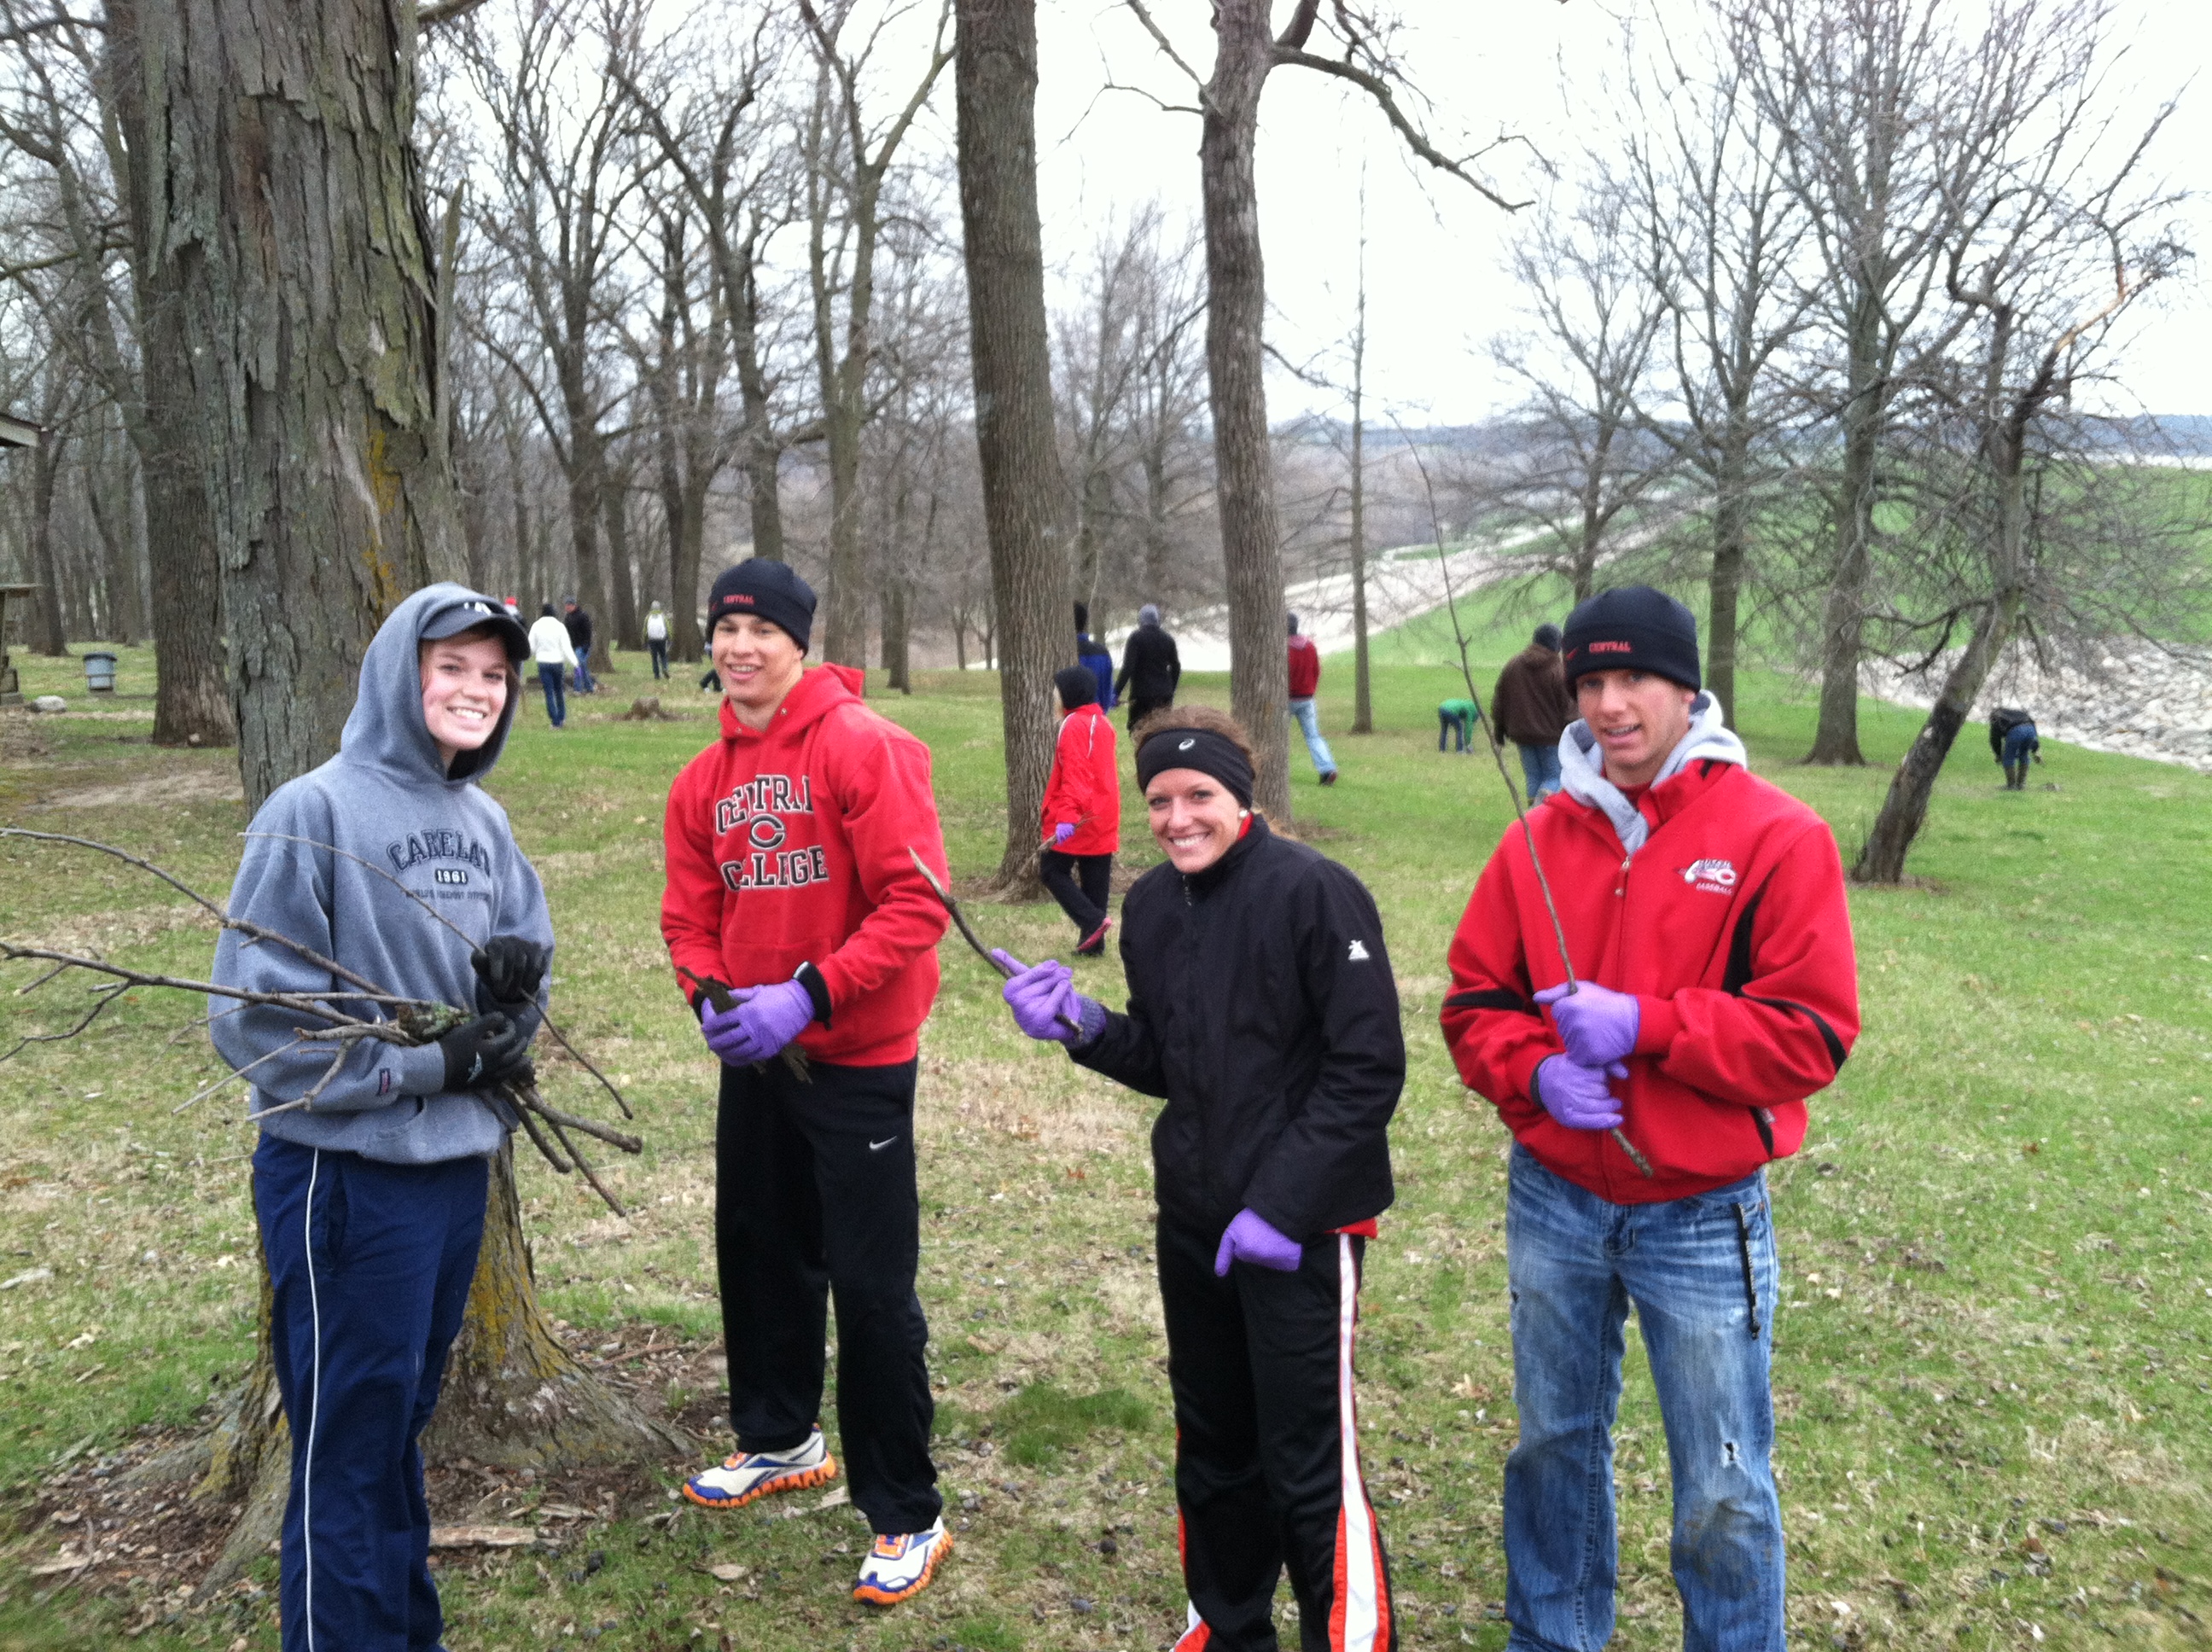 Central College Community Service Day April 15